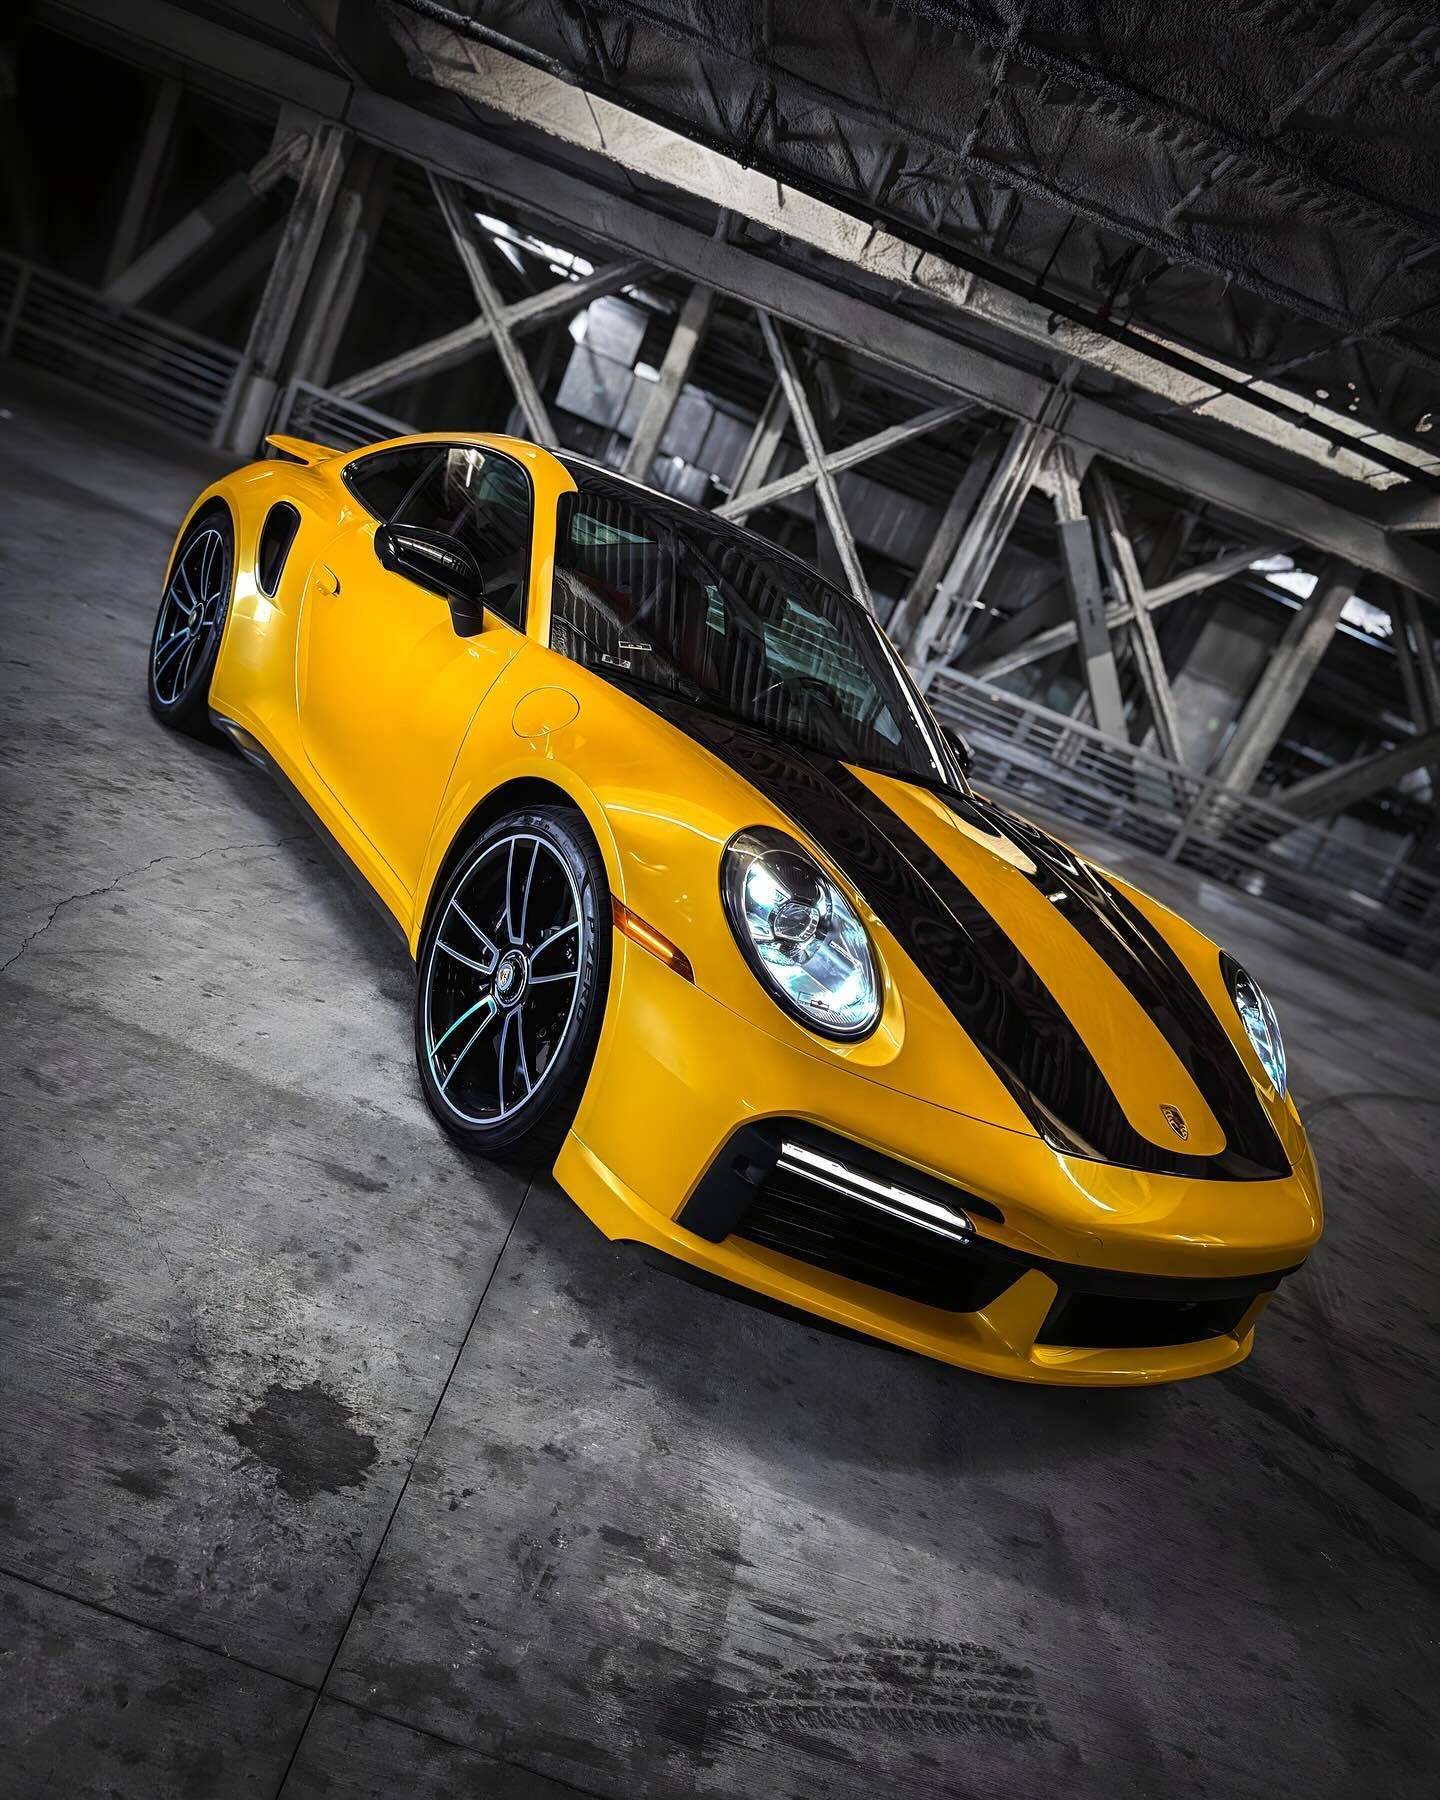 Porsche 911 Turbo S wrapped in @inozetek Super Gloss Dandelion Yellow w/ gloss Black accents. Picked up, wrapped and returned 👍🏻

#mobileservice #mobilewraps #thewrapdistrict #thewrapdistrictla #vinylwrap #wrapped #paintisdead #southbay #sanfernand